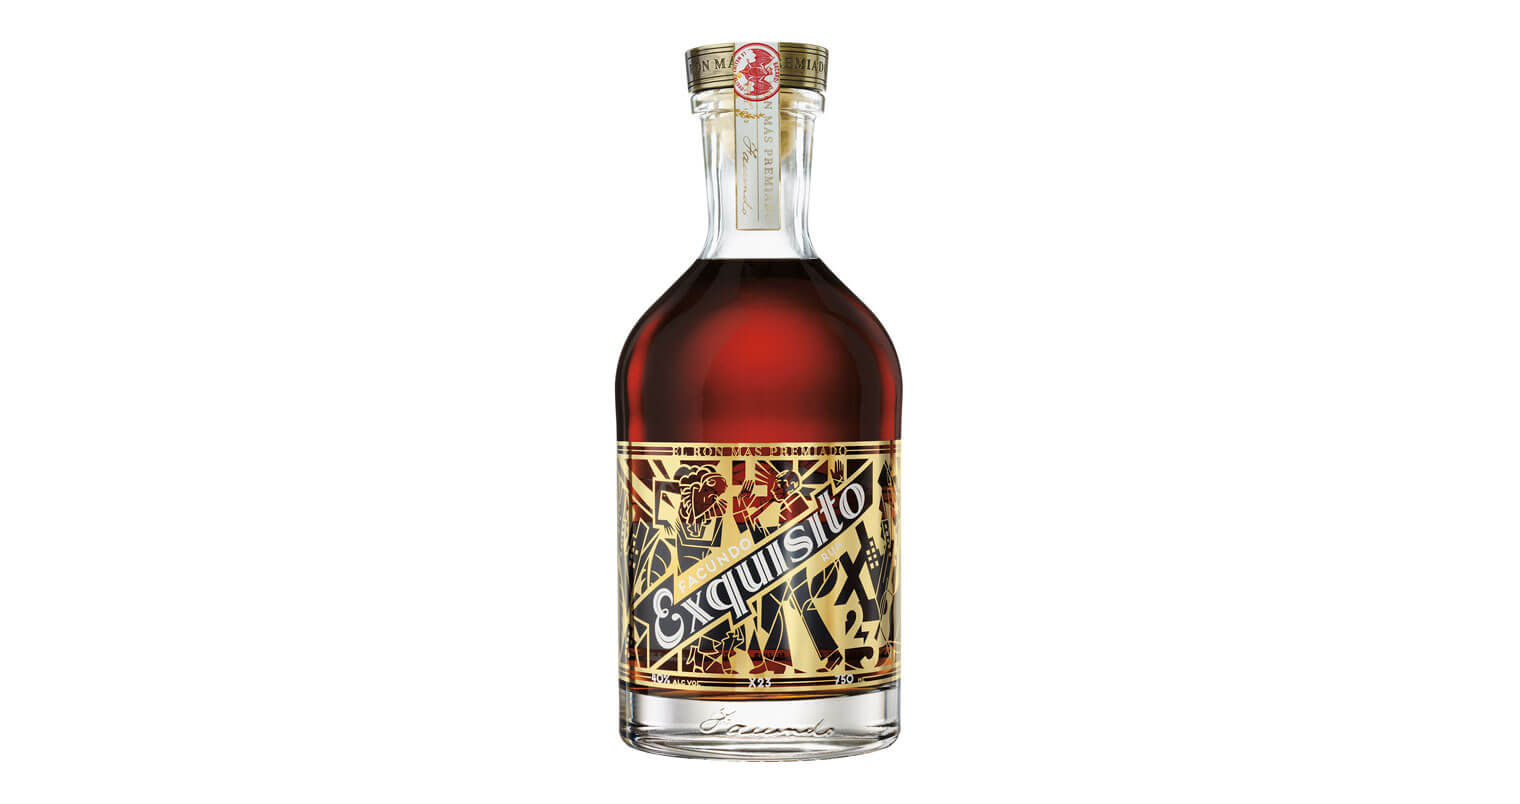 FACUNDO Exquisito Wins Gold at International Spirits Challenge, featured image